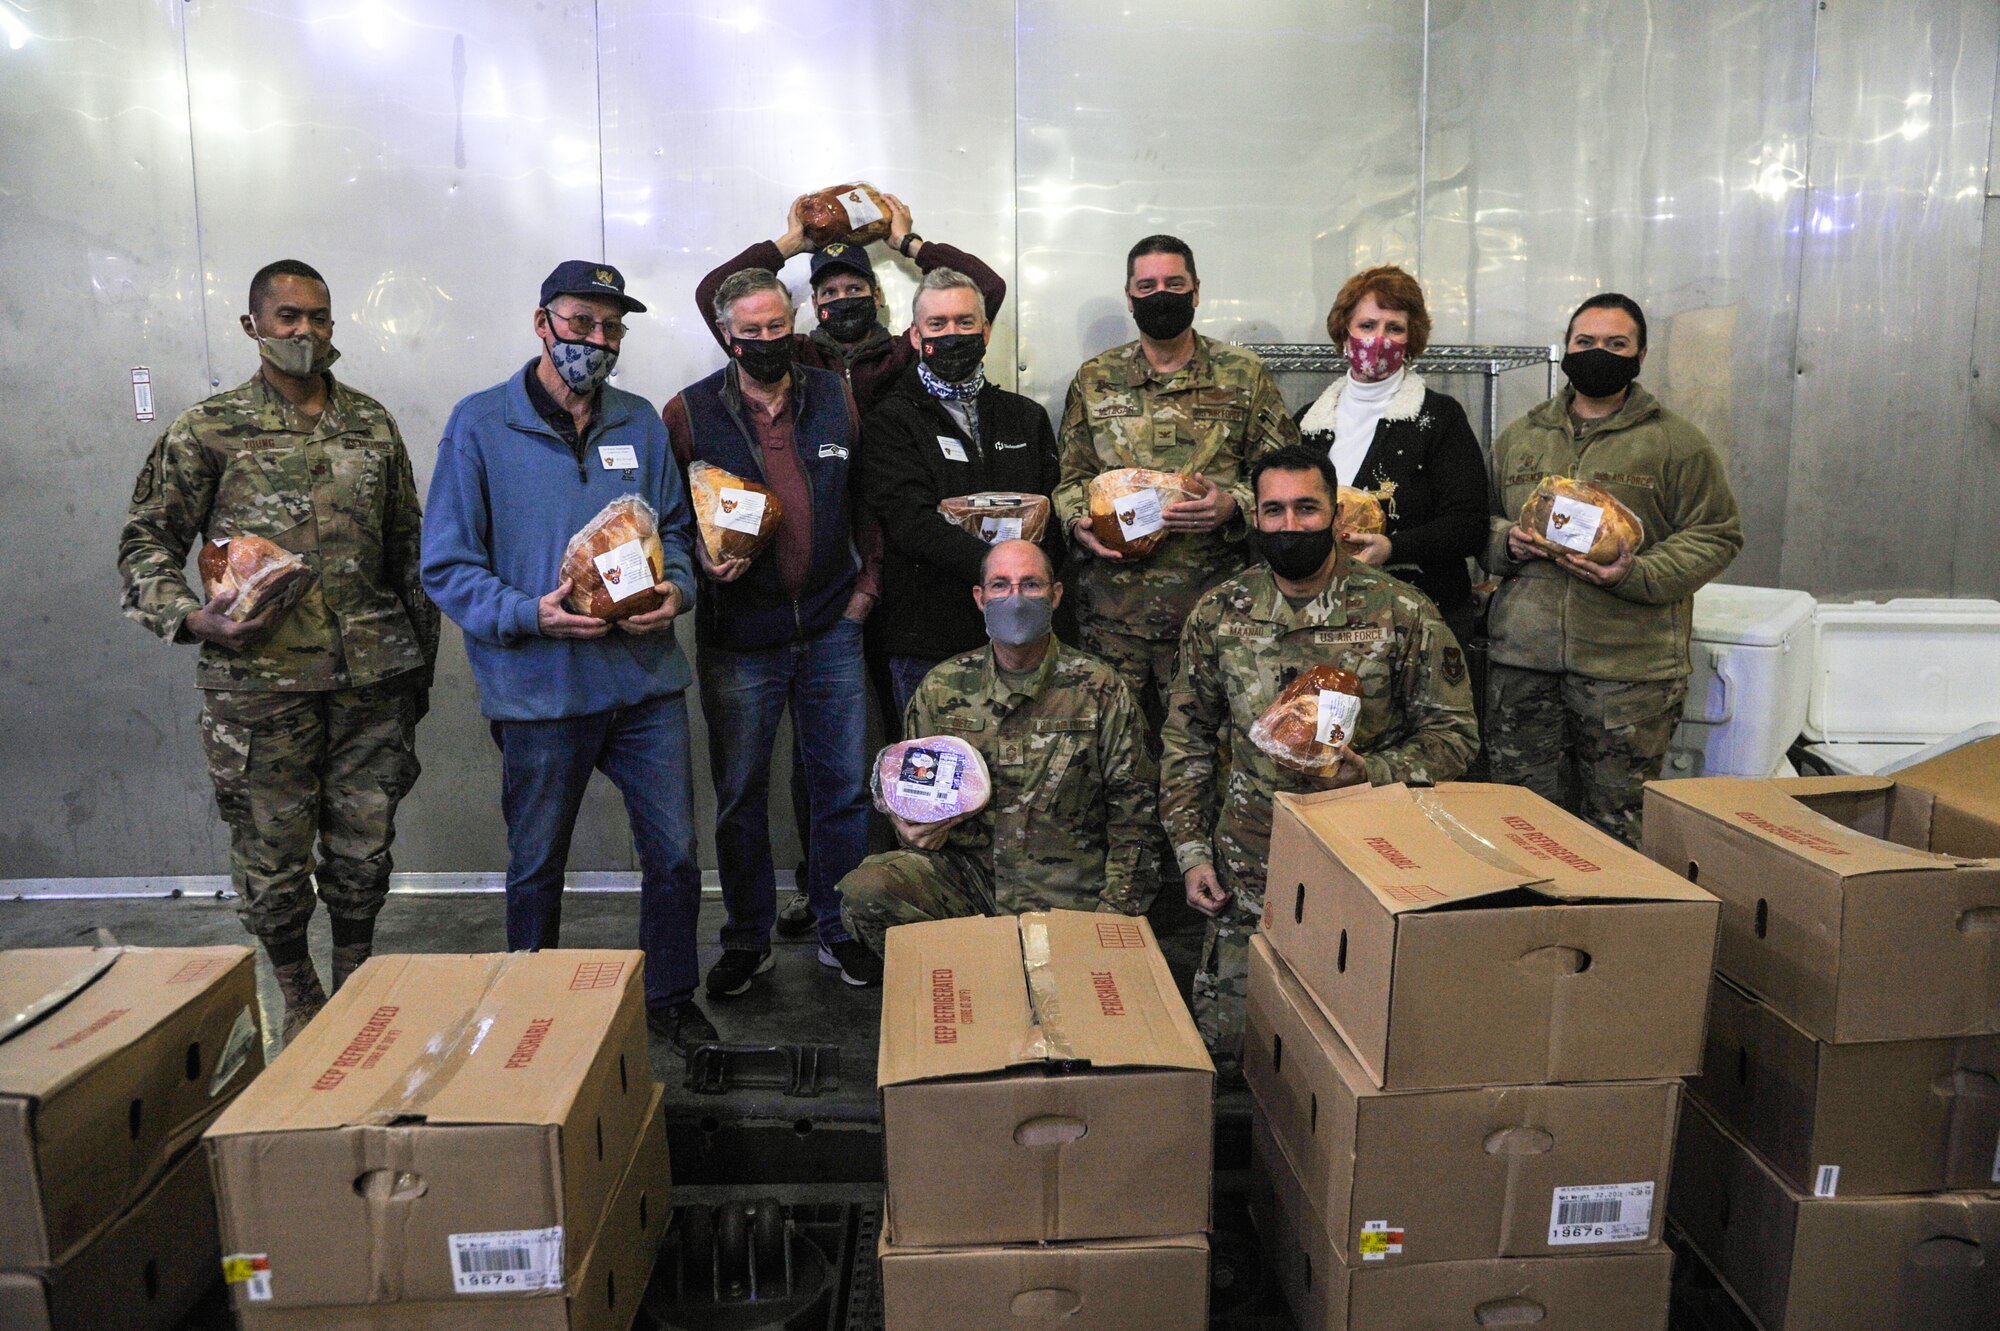 Local Air Force Association chapter delivers holiday hams in annual event benefiting Air Force Reserve families